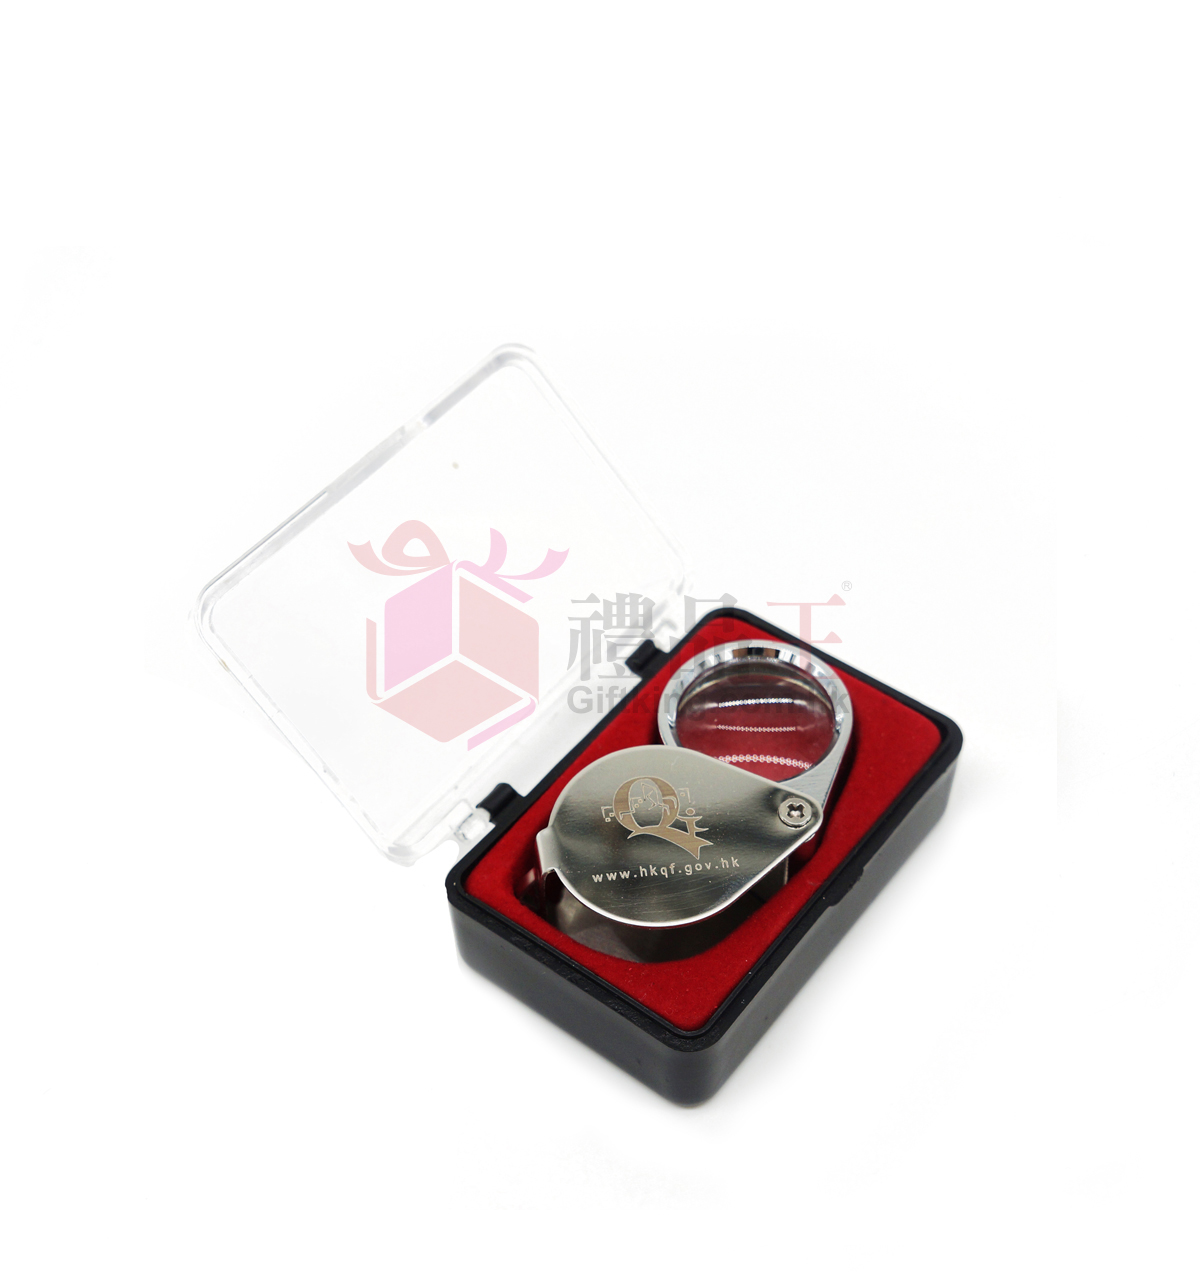 HKQF Magnifier (Stationery Gift)